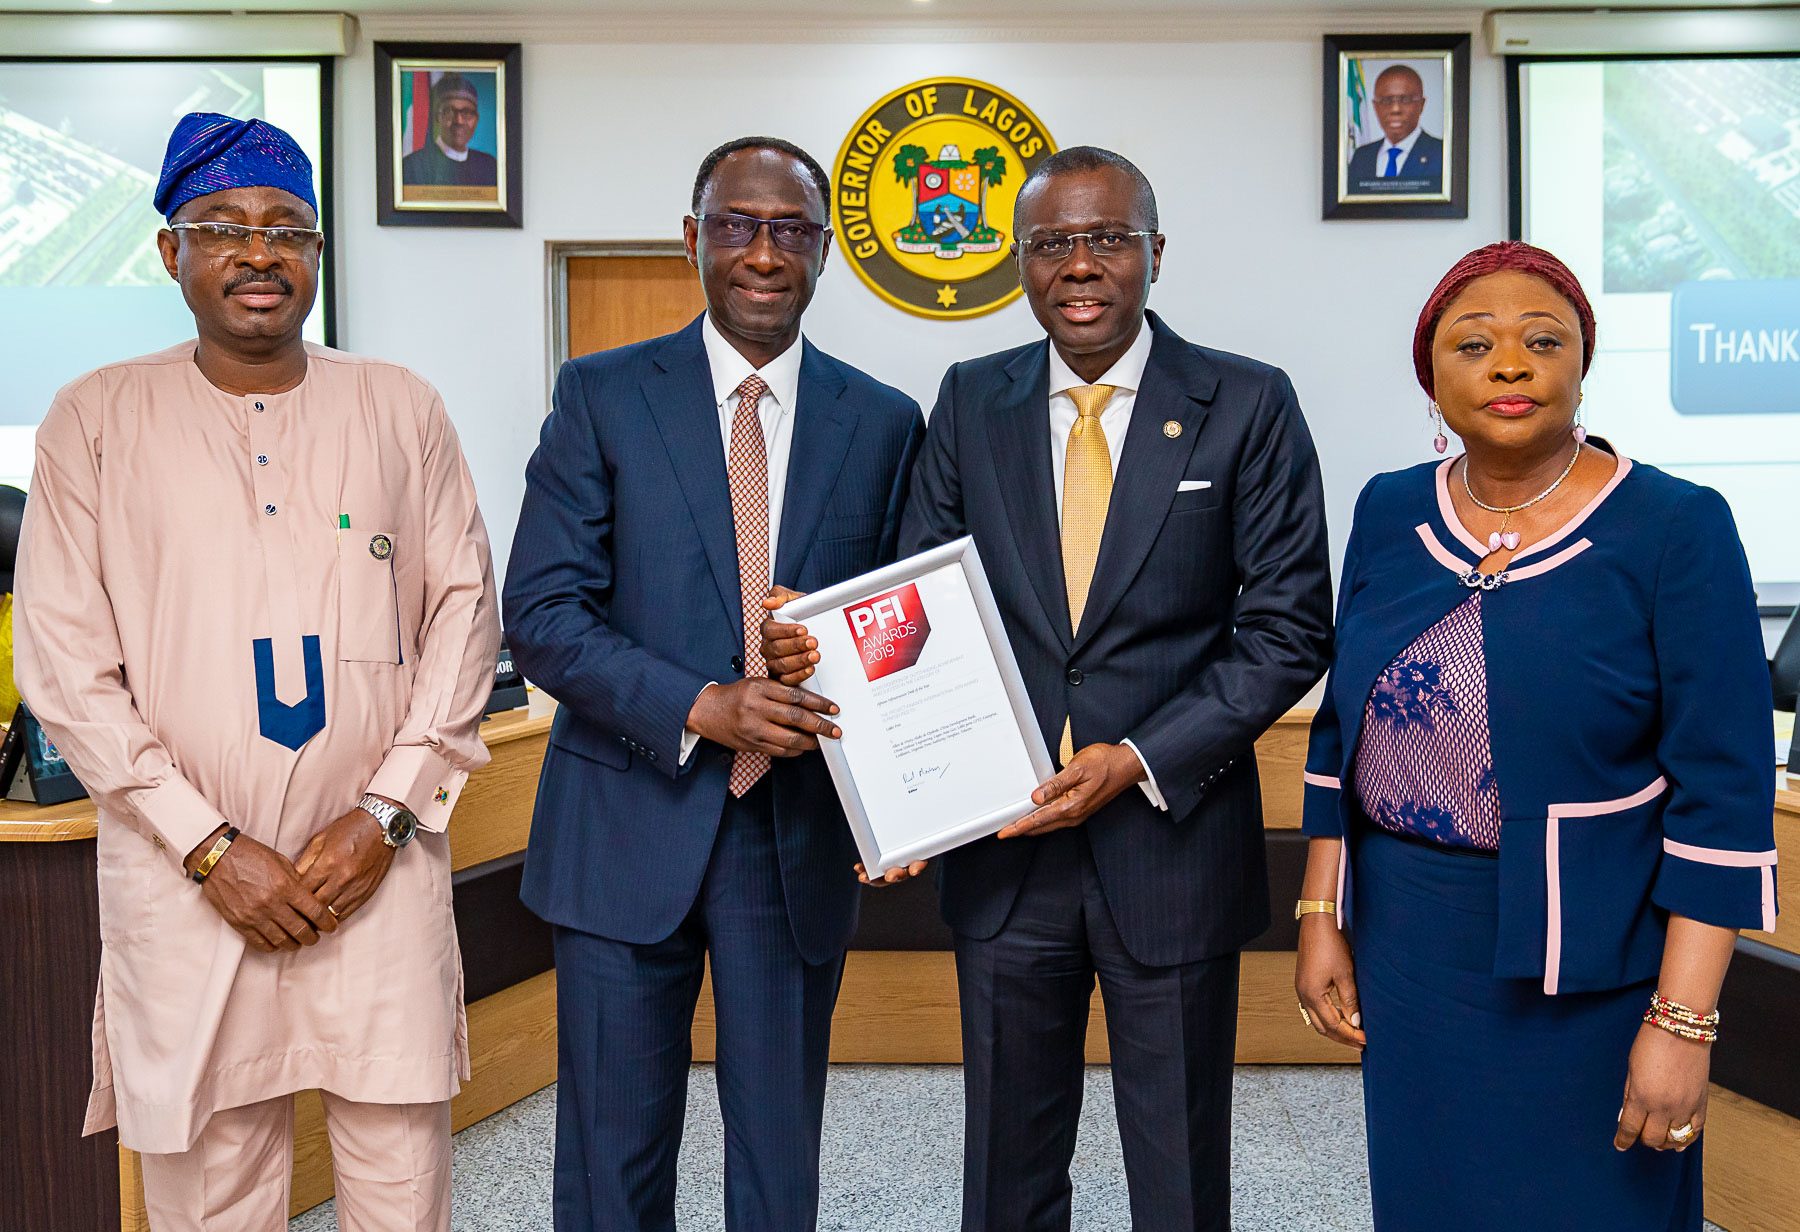 L-R: Special Adviser to the Governor on Commerce, Mr. Oladele Ajayi; Chairman, Lekki Port, Mr. Abiodun Dabiri; Lagos State Governor, Mr. Babajide Sanwo-Olu and Commissioner for Commerce, Industry and Cooperatives, Hon. (Mrs) Lola Akande, during the presentation of Project Finance International (PFI) Award of African Infrastructure Deal of the Year, won by Lekki Port, at Lagos House, Alausa, Ikeja, on Tuesday, February 18, 2020.